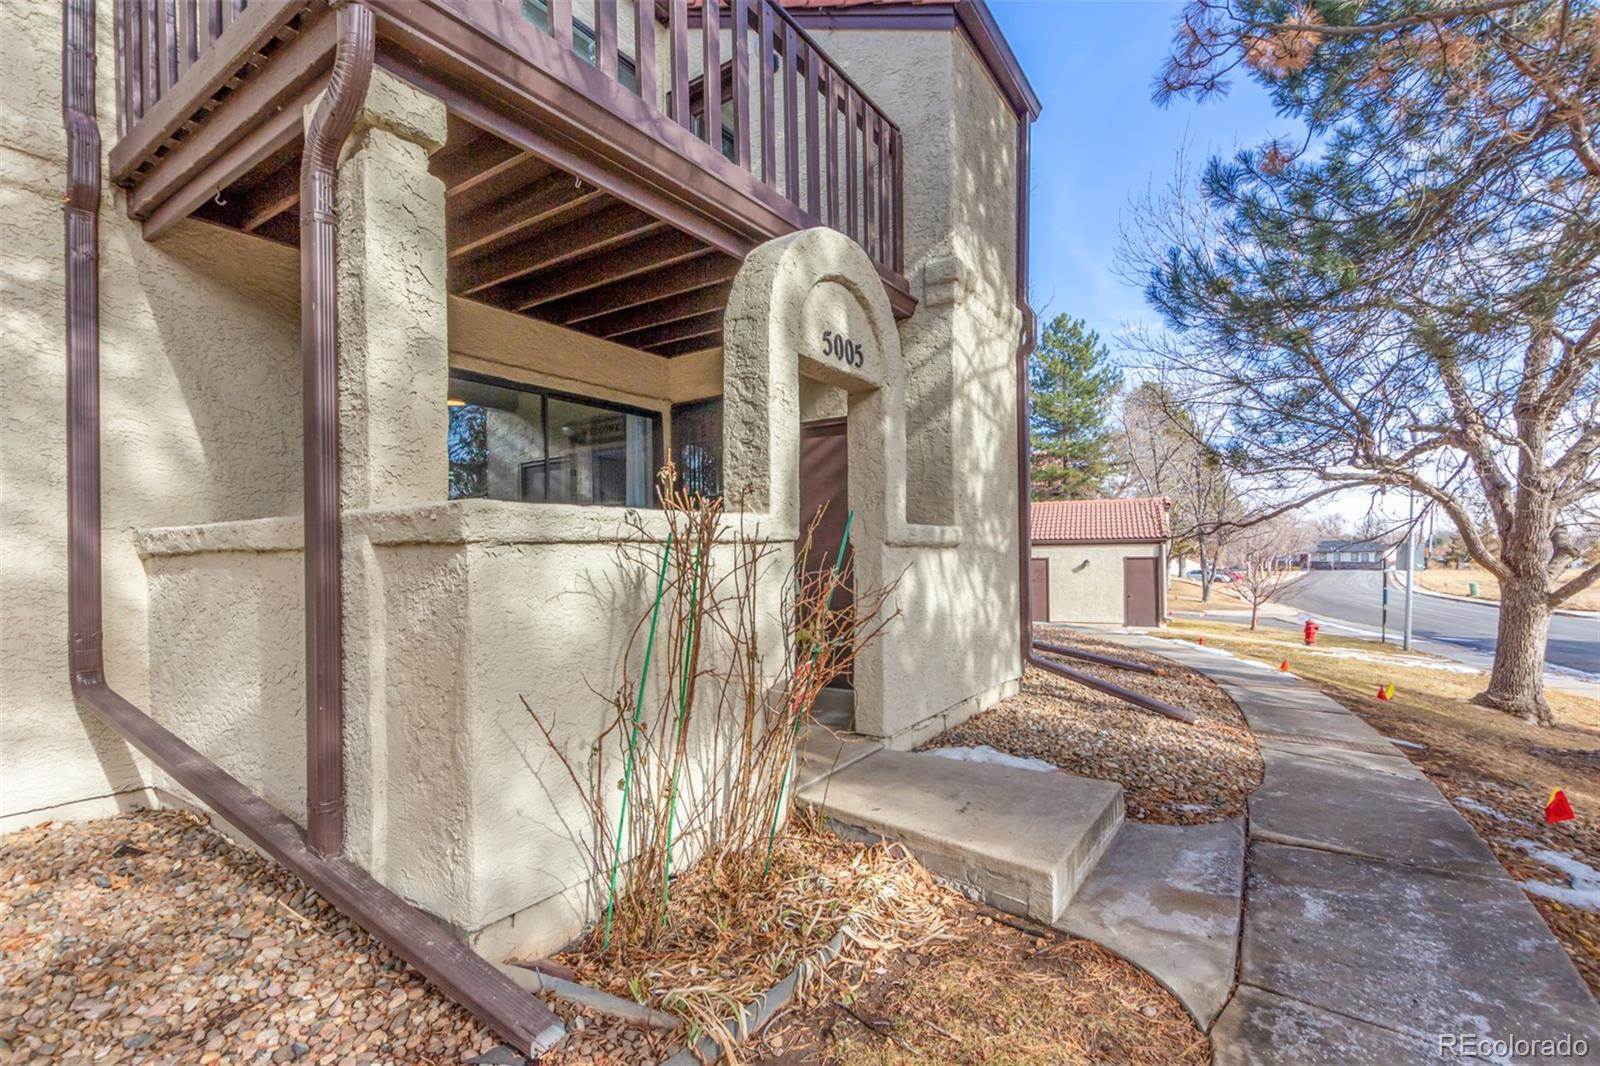 5005 West 73rd Avenue, Westminster, CO 80030